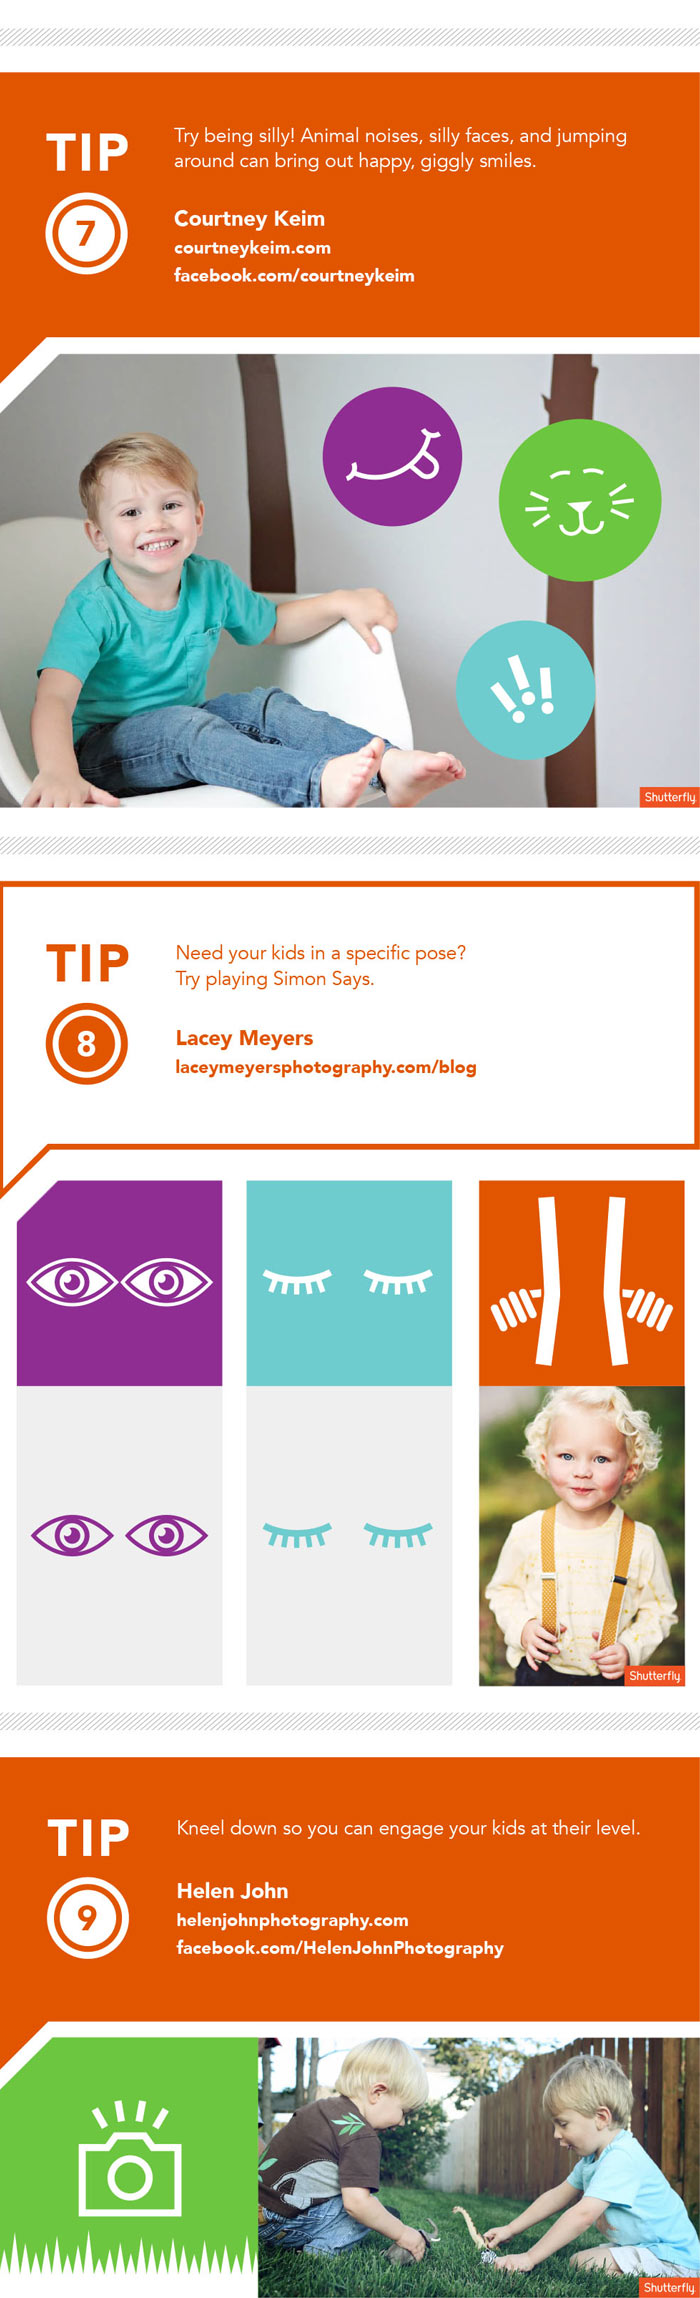 Kids Photography Tips Ingrographic by Shutterfly